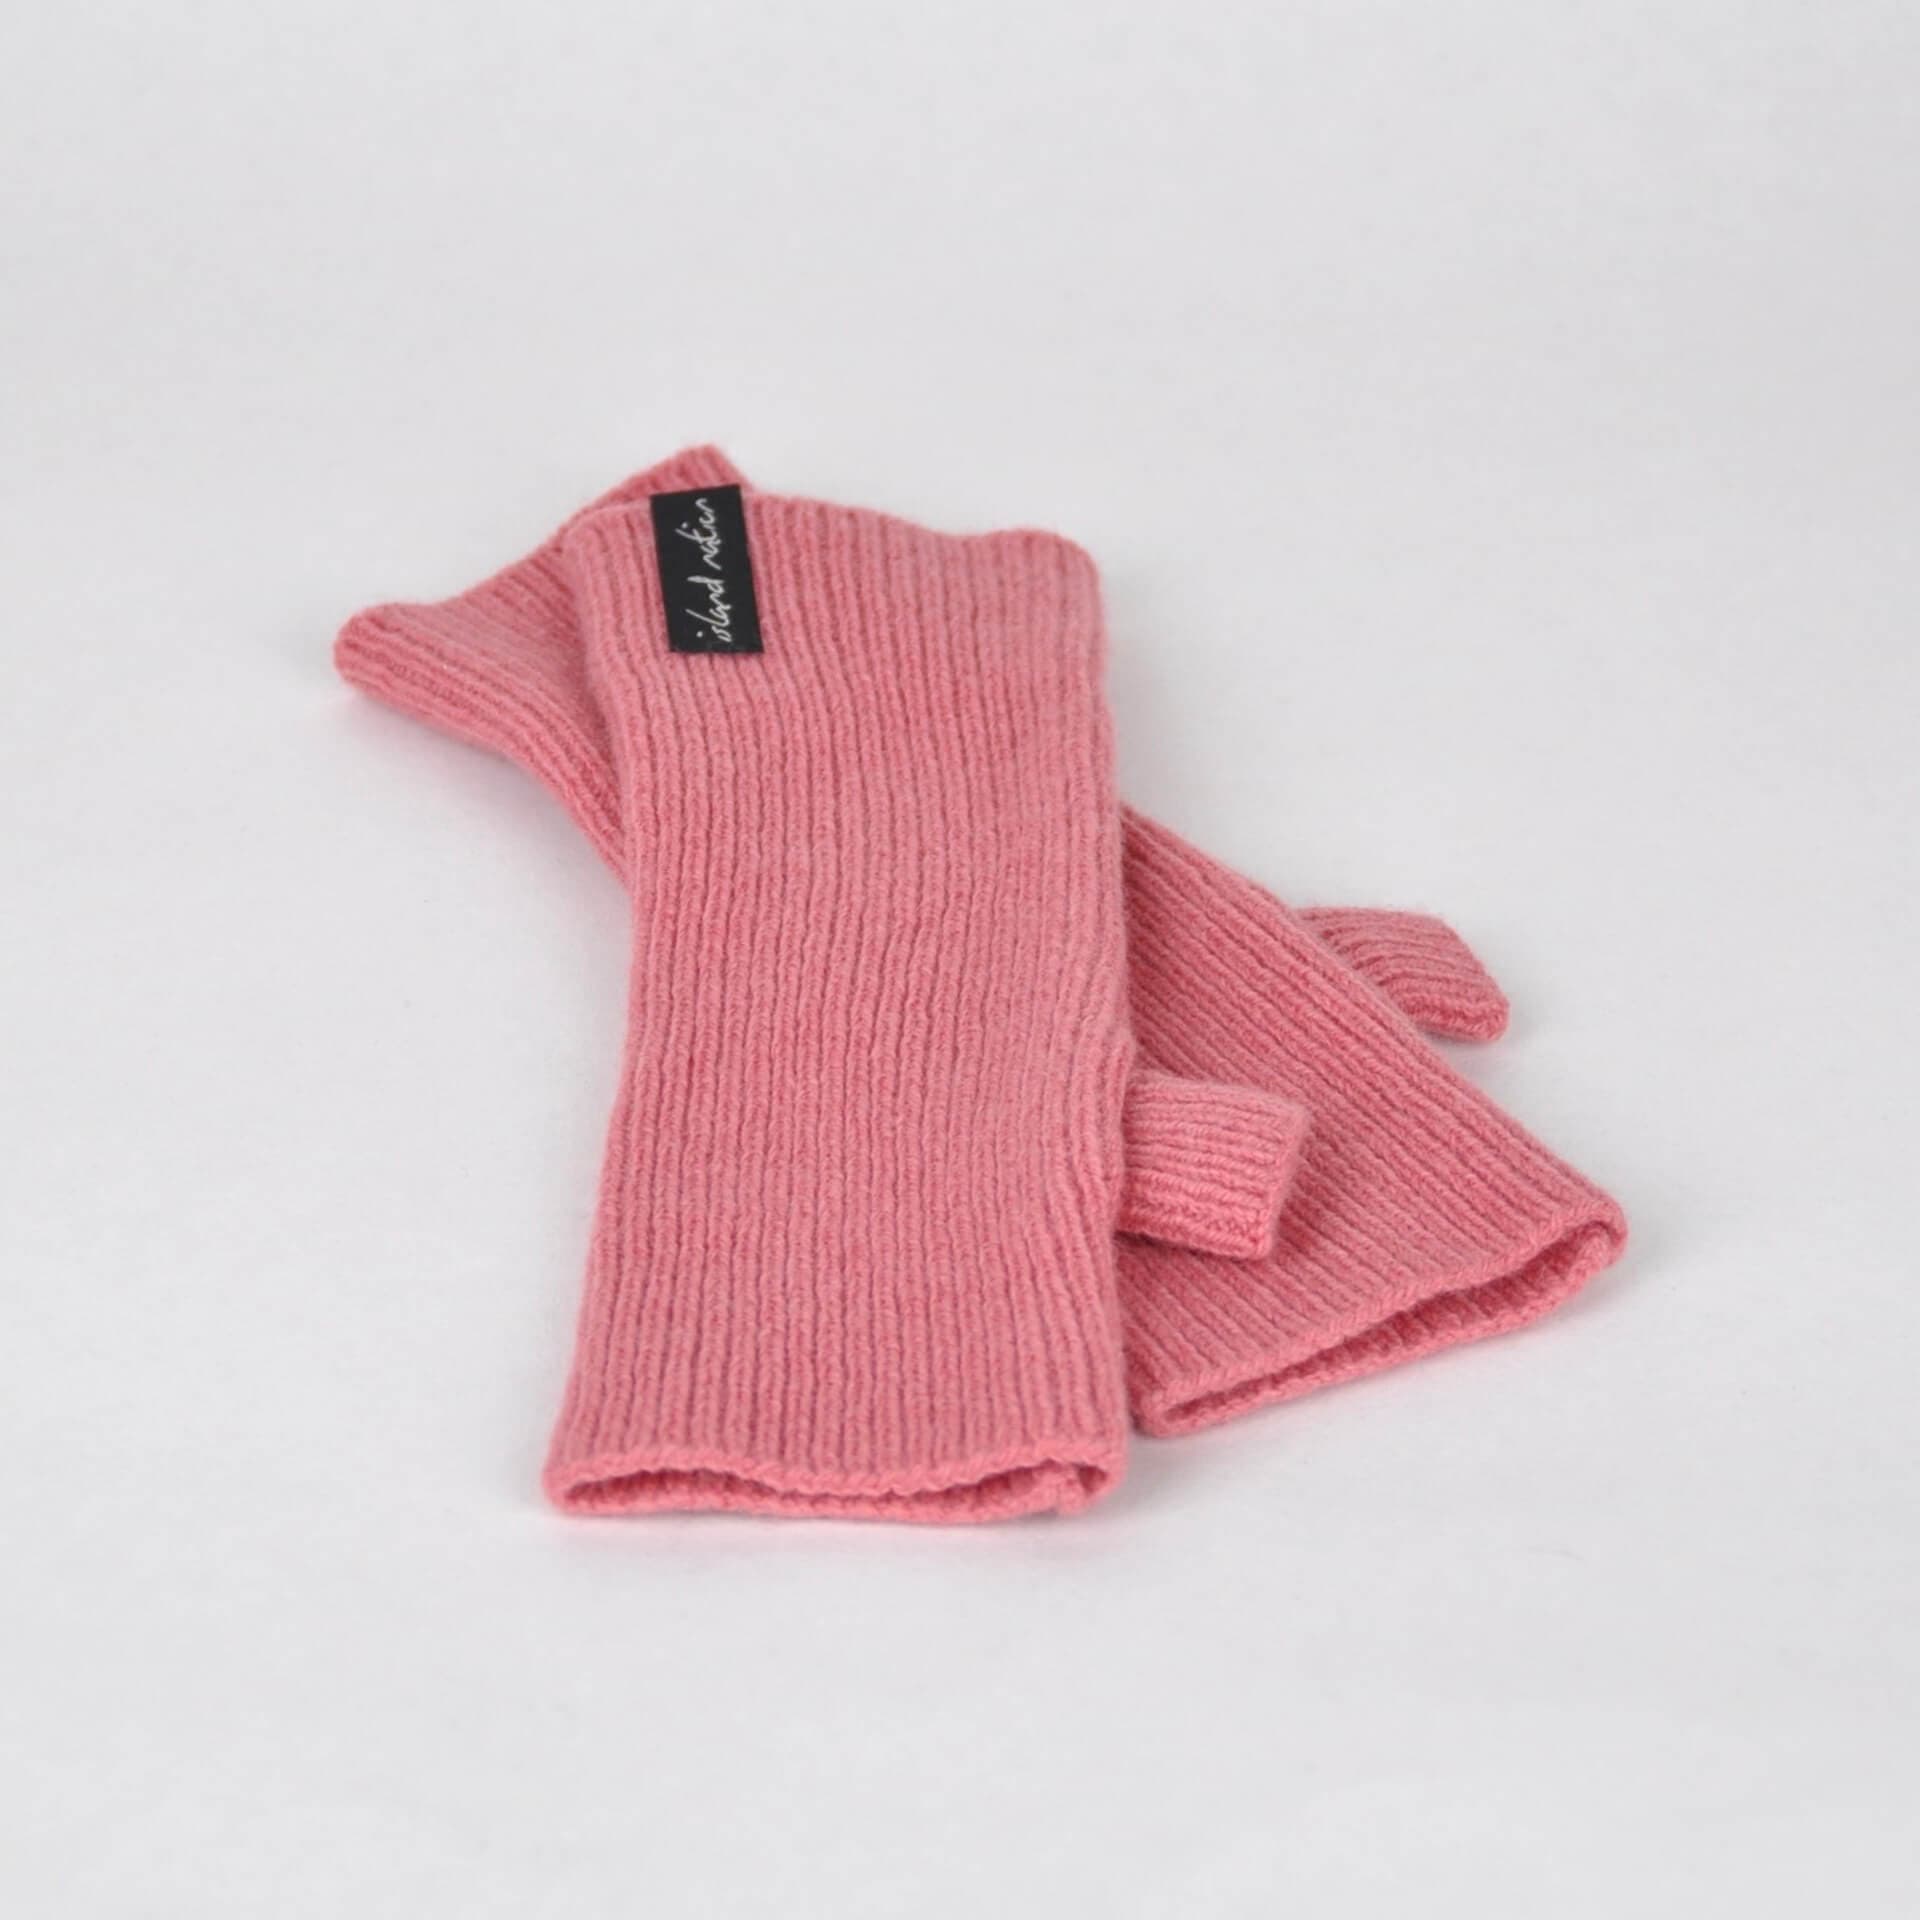 Island Nation Mittens Ribbed Wrist Warmers - Dusky Pink